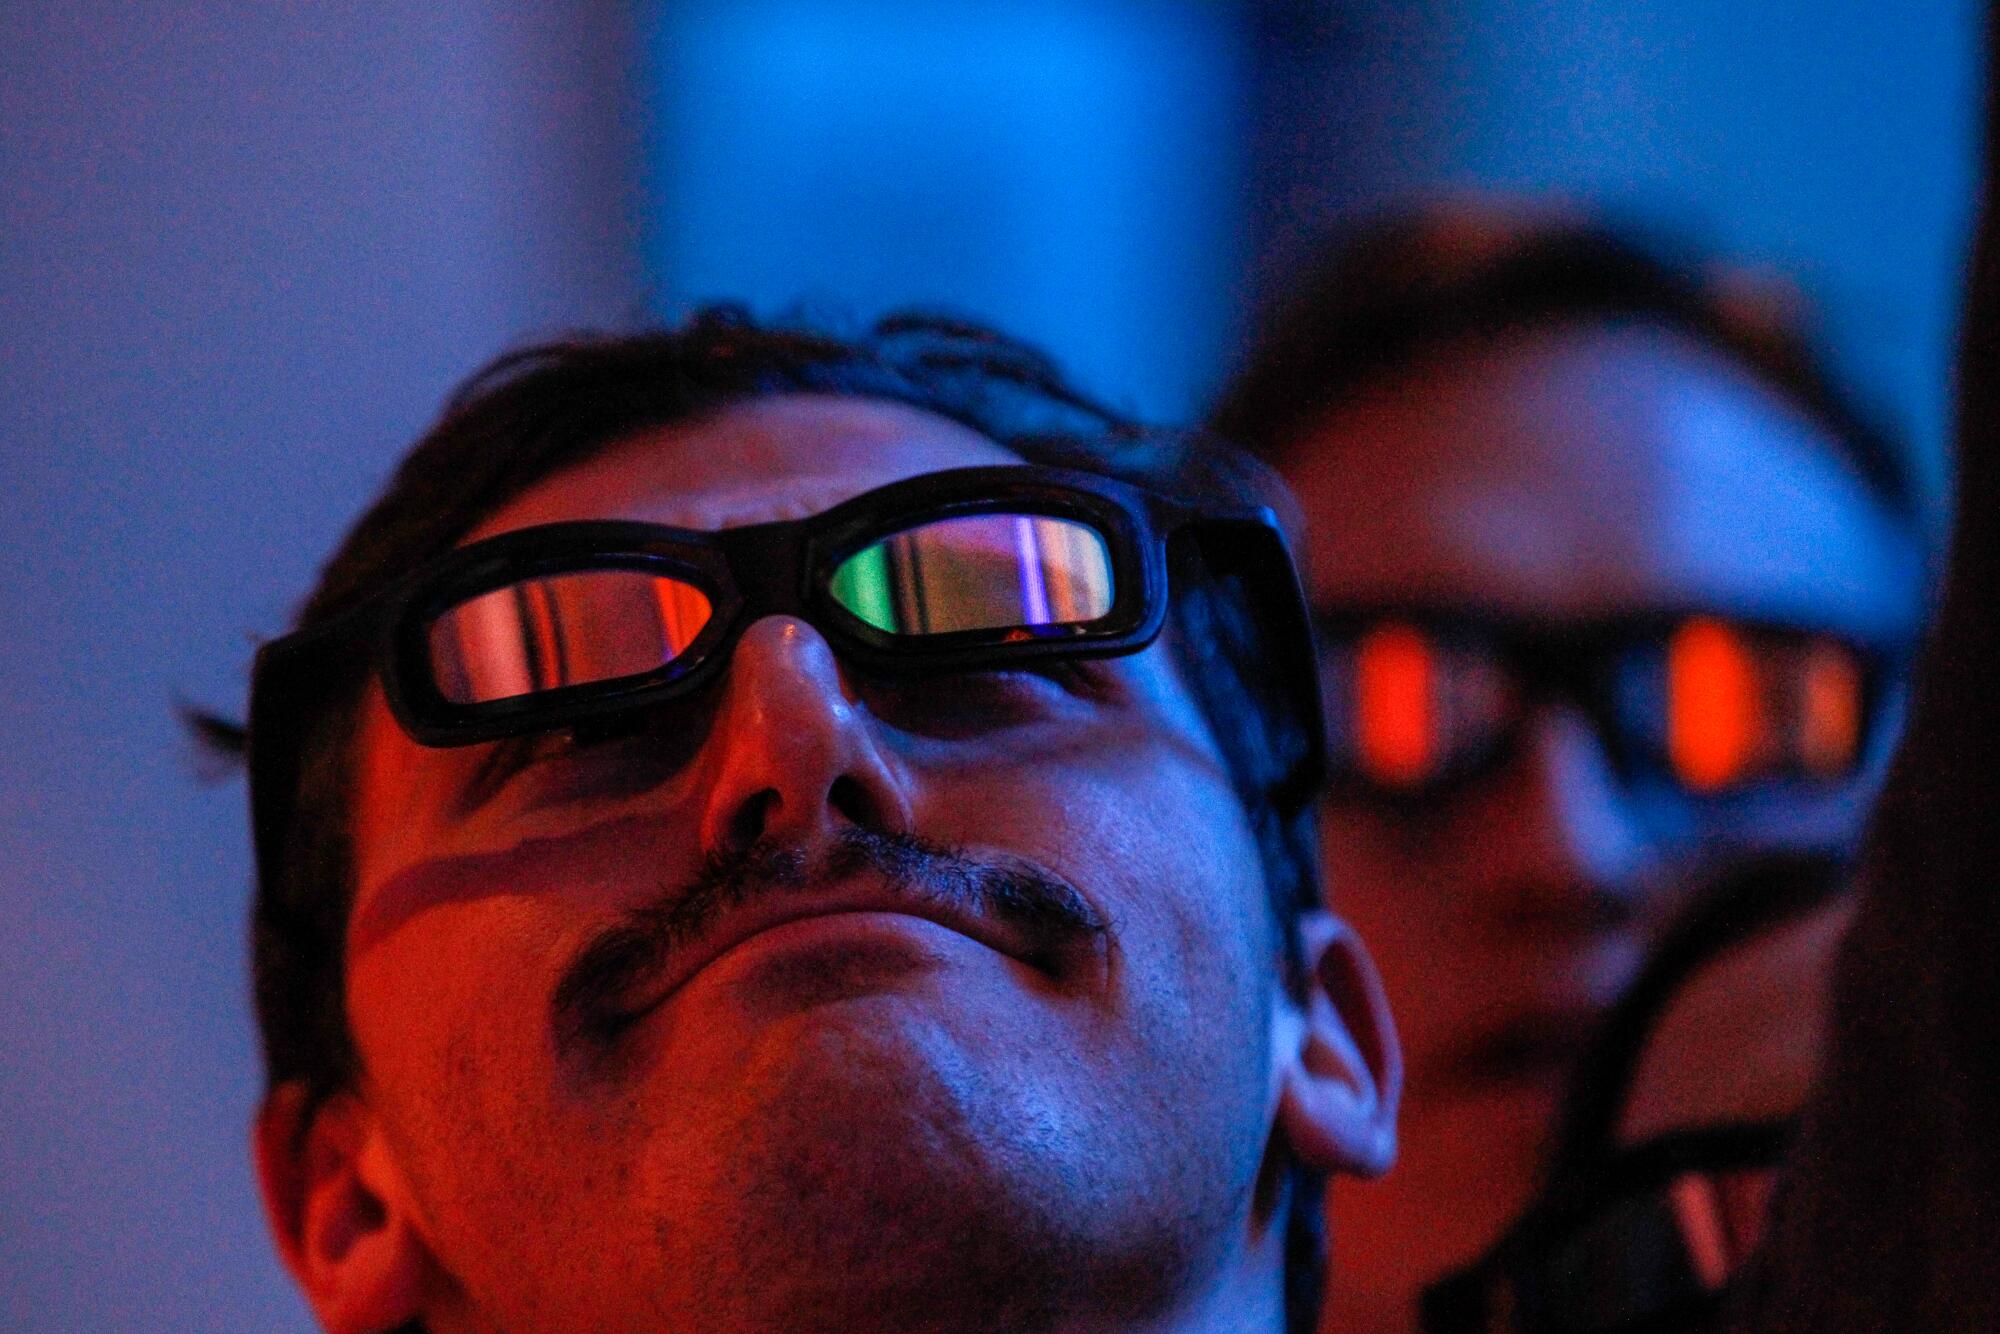 A man wearing 3-D glasses and looking up.